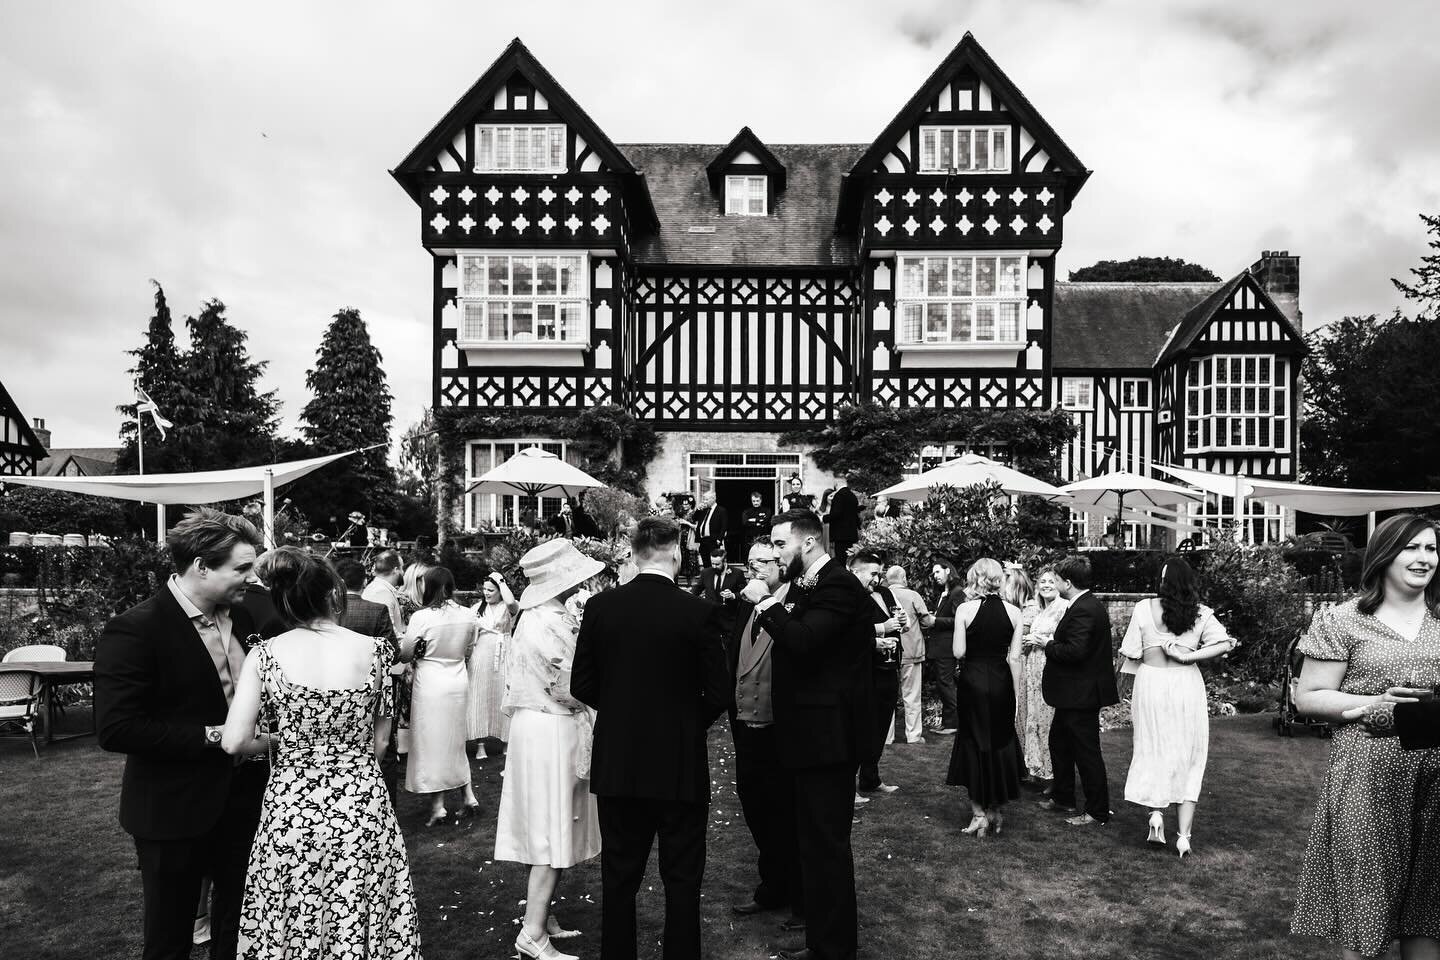 A wonderful wedding at @highfield_hotel
Part of the reception was held outside on Highfield&rsquo;s beautiful grounds. 
So looking forward to getting back here in April. 🤍

#yorkshireweddingphotographer #candidweddingphotographer #documentarywedding